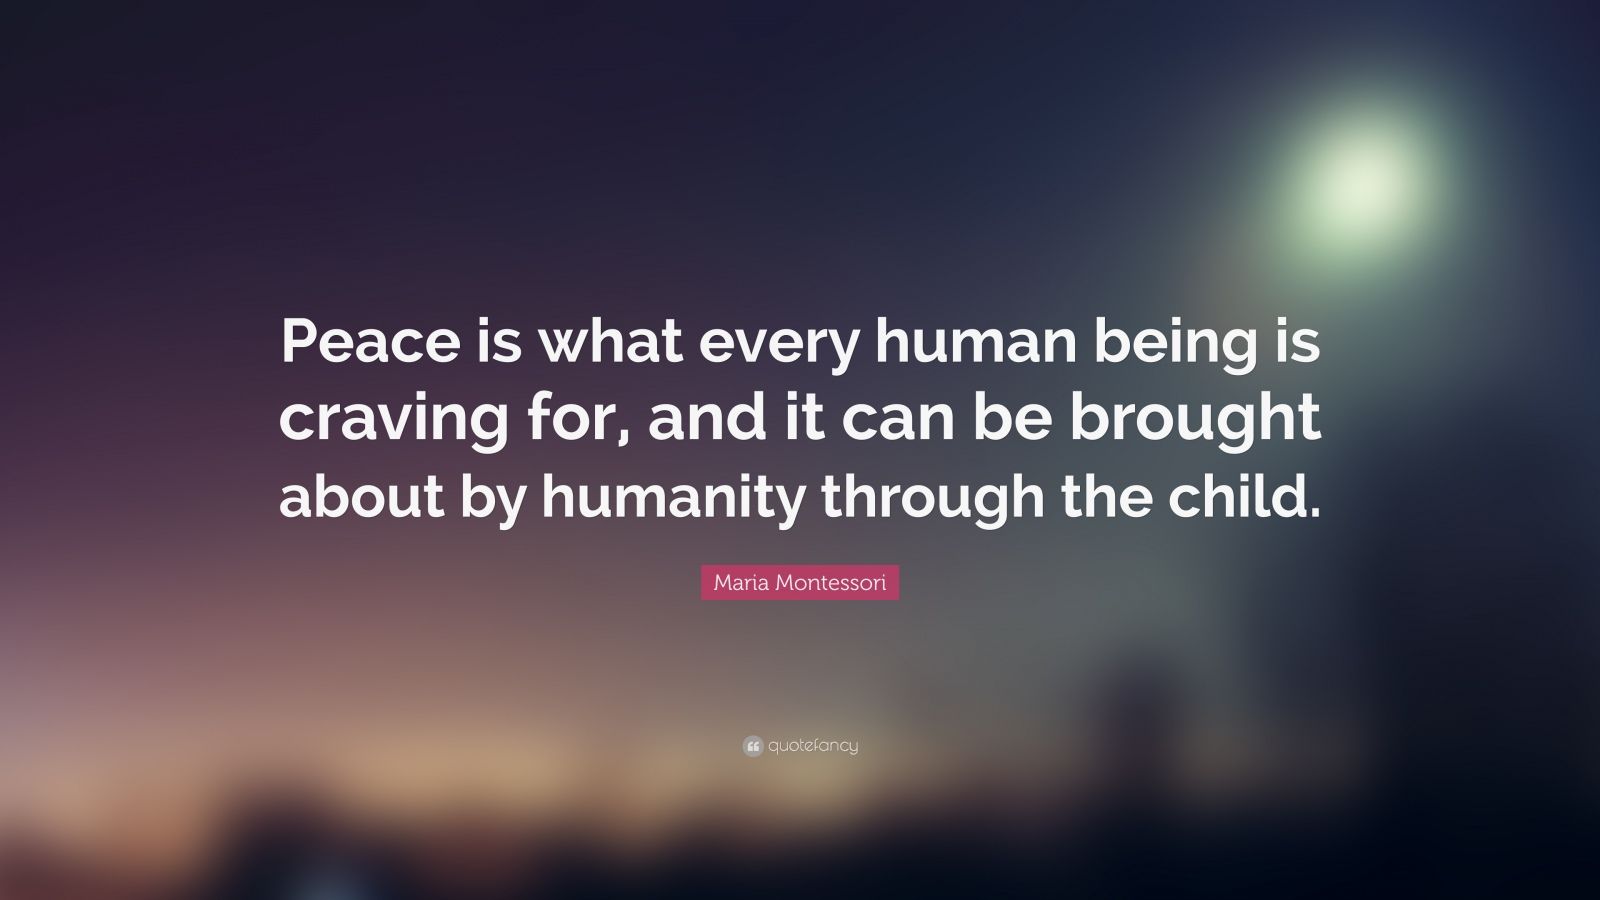 Maria Montessori Quote: “Peace is what every human being is craving for